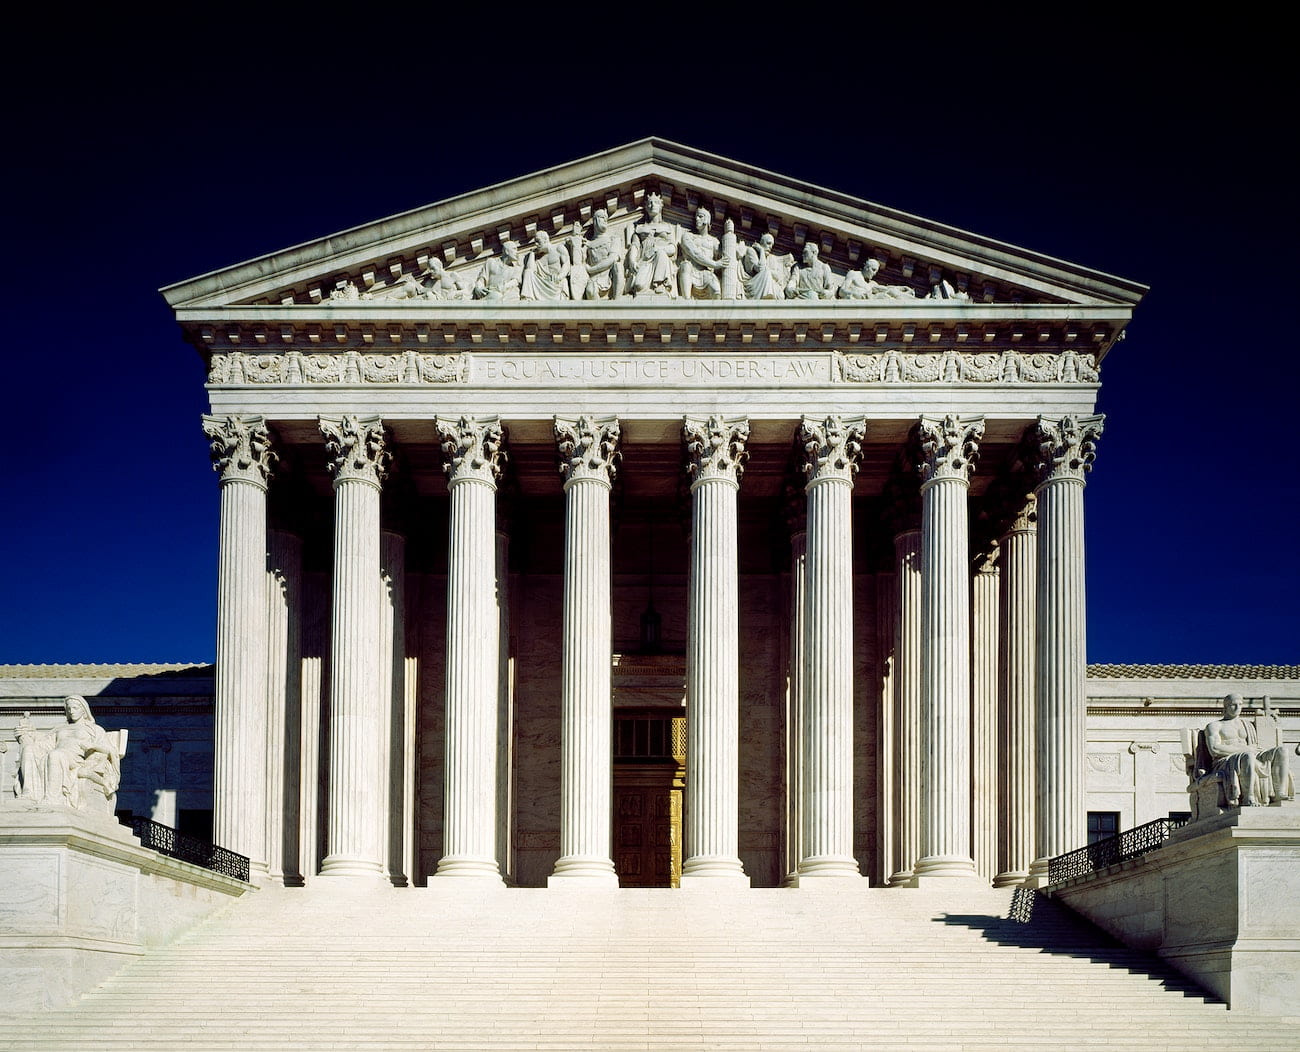 Image shows the Supreme Court building from the front.